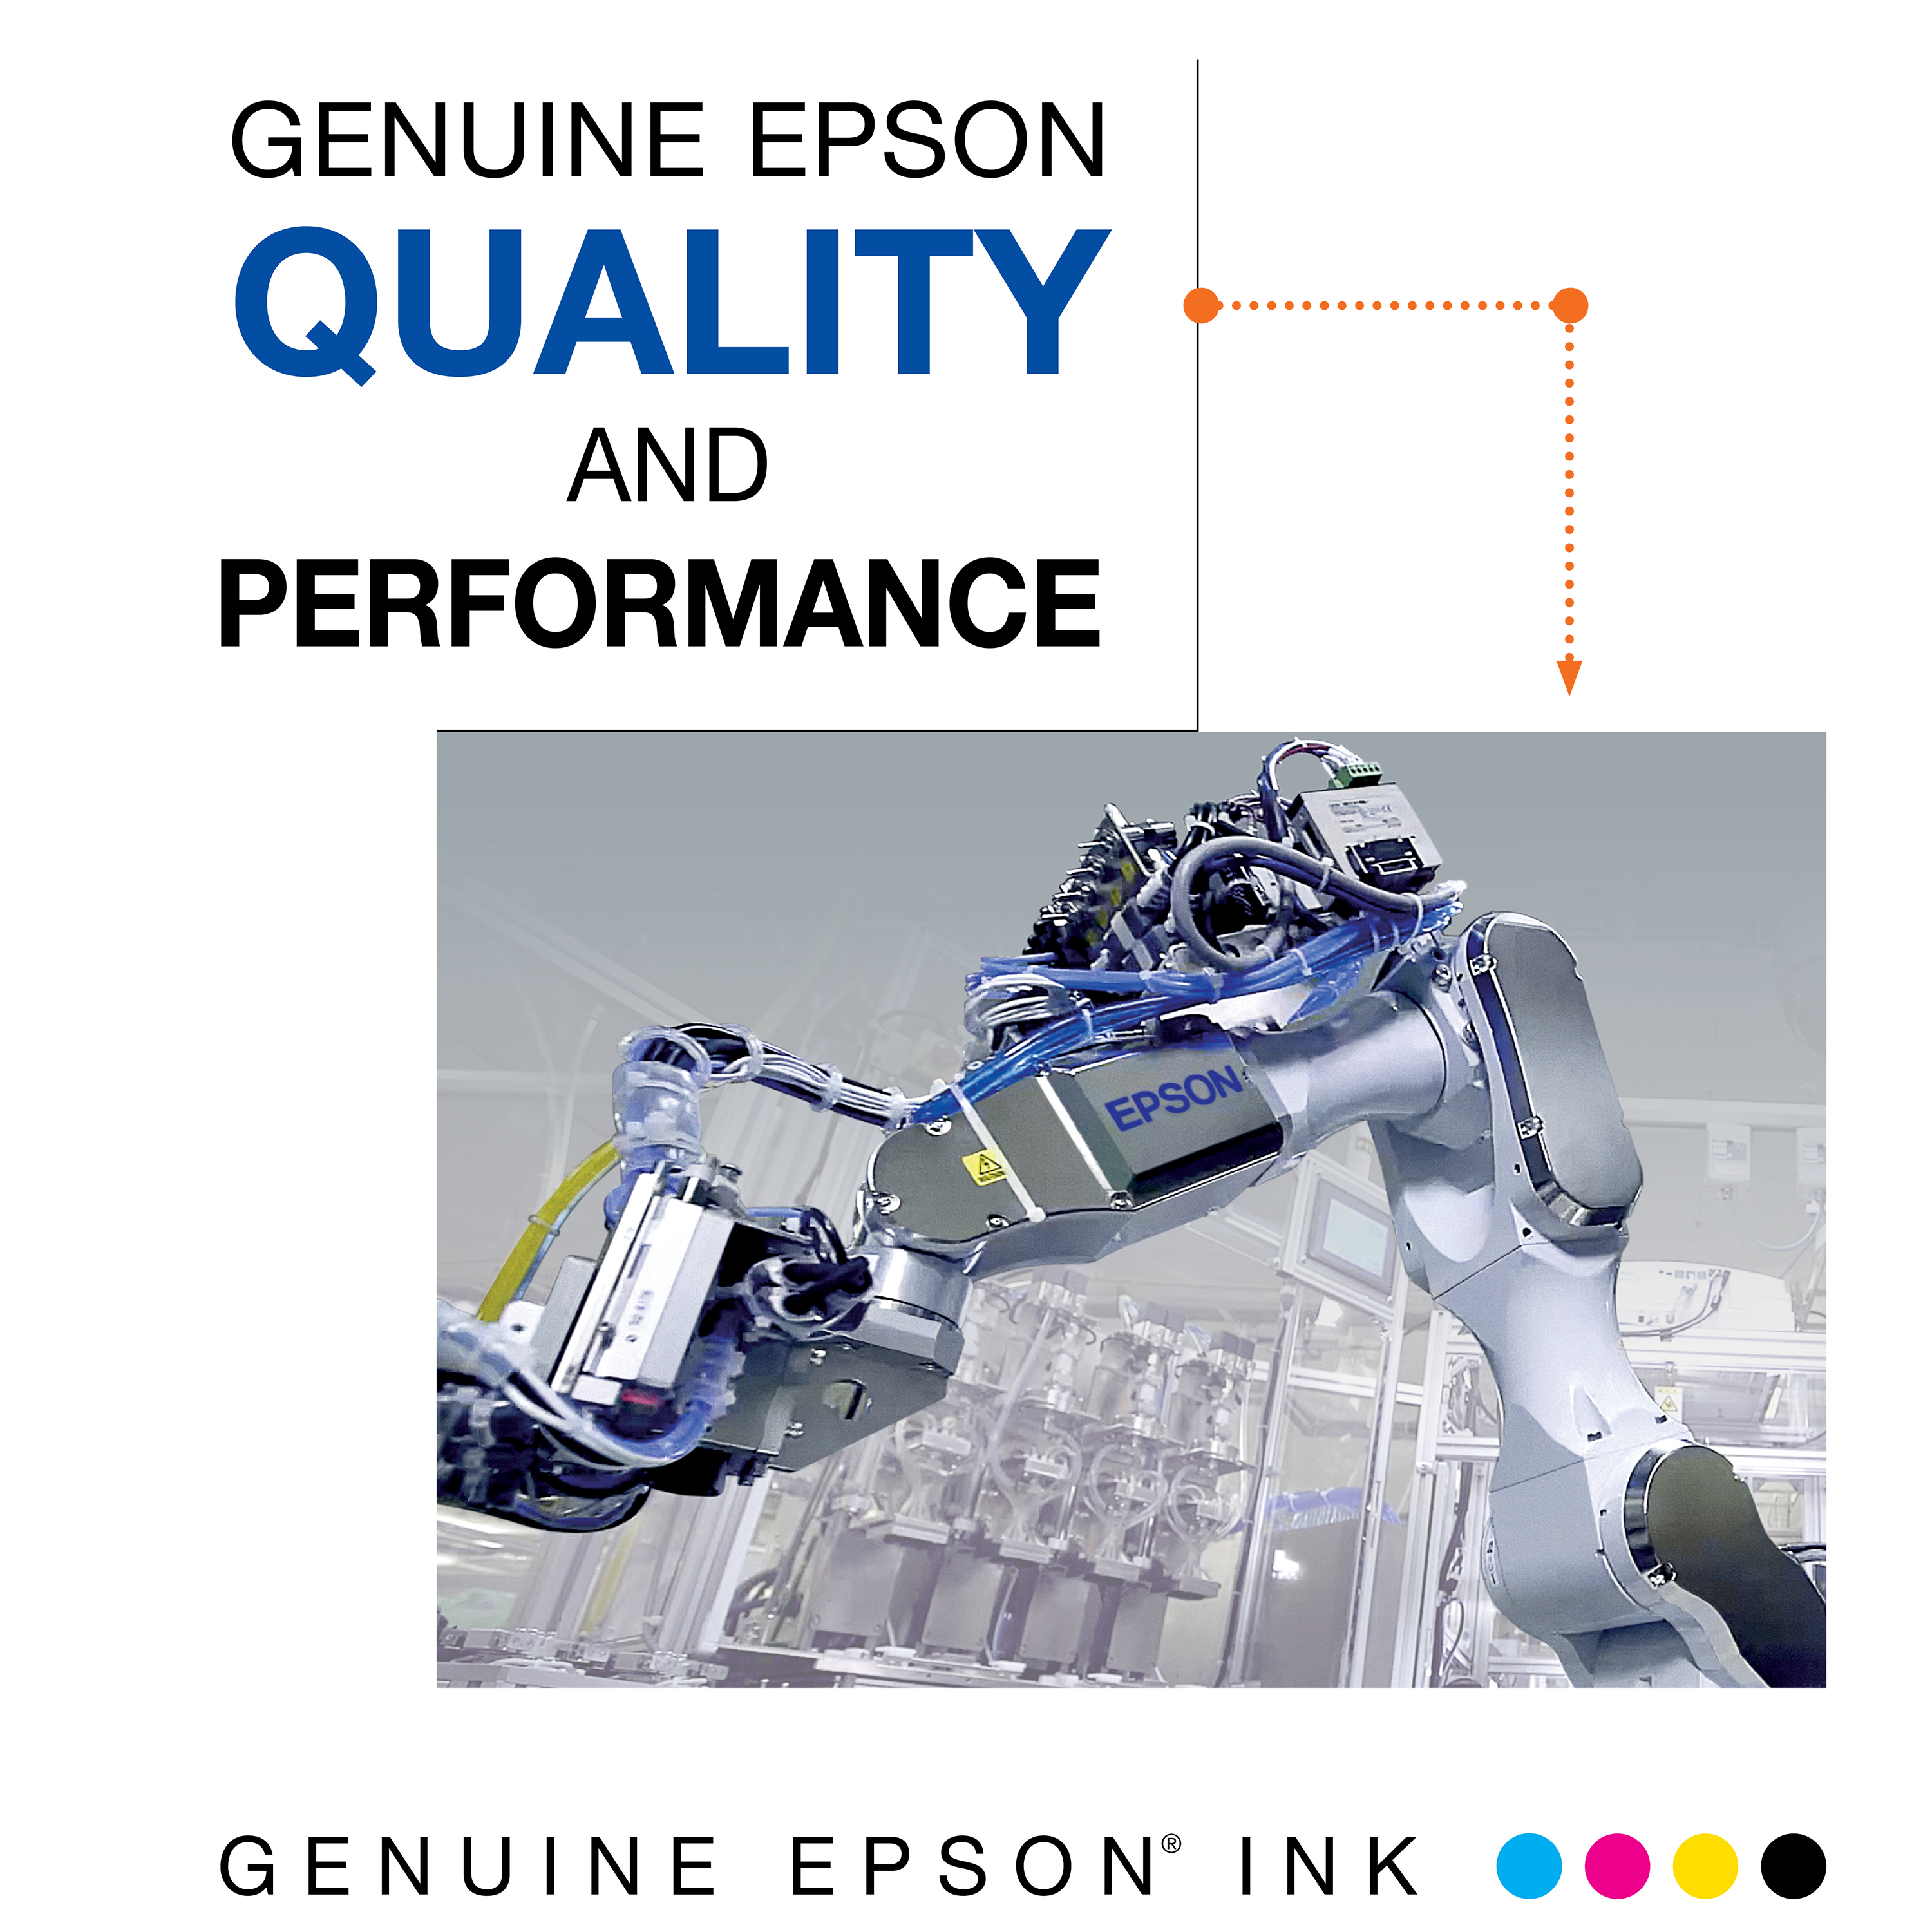 EPSON 702 DURABrite Ultra Ink High Capacity Black & Standard Color Cartridge Combo Pack (T702XL-BCS) Works with WorkForce Pro WF-3720, WF-3730, WF-3733 - image 3 of 5